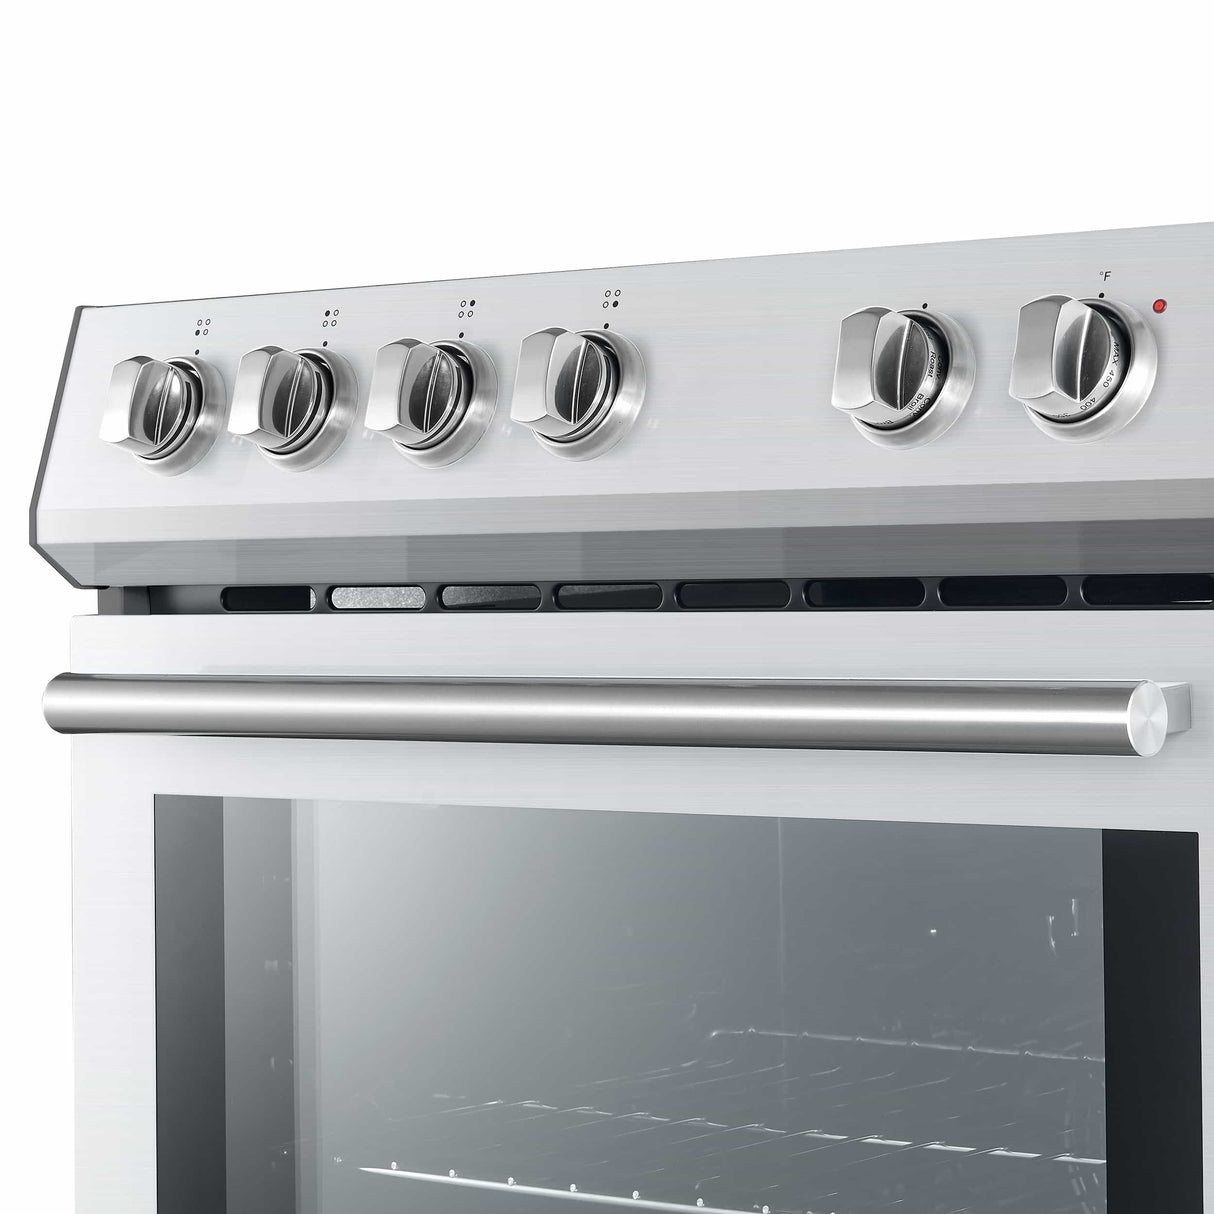 Forno Leonardo Espresso 30-Inch Electric Range with 5.0 cu. Ft. Electric Oven in Stainless Steel with Brass Trim (FFSEL6012-30)